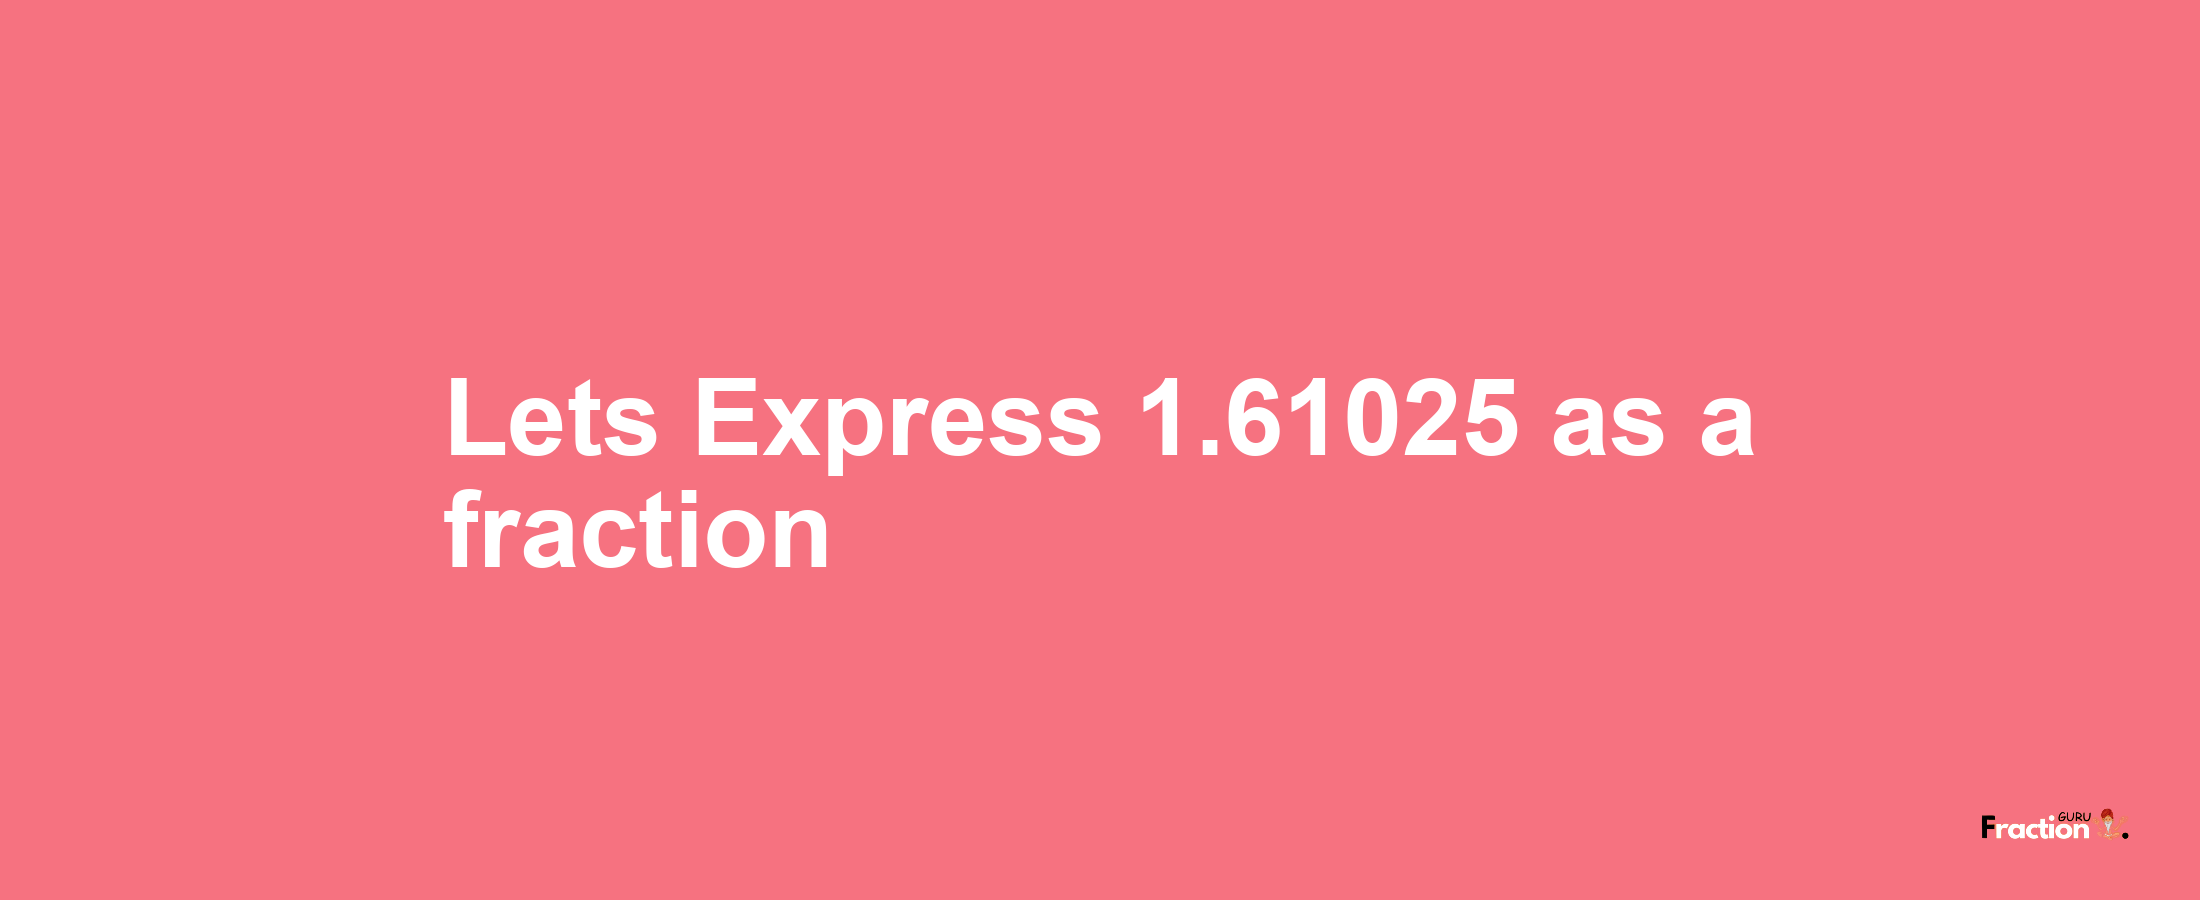 Lets Express 1.61025 as afraction